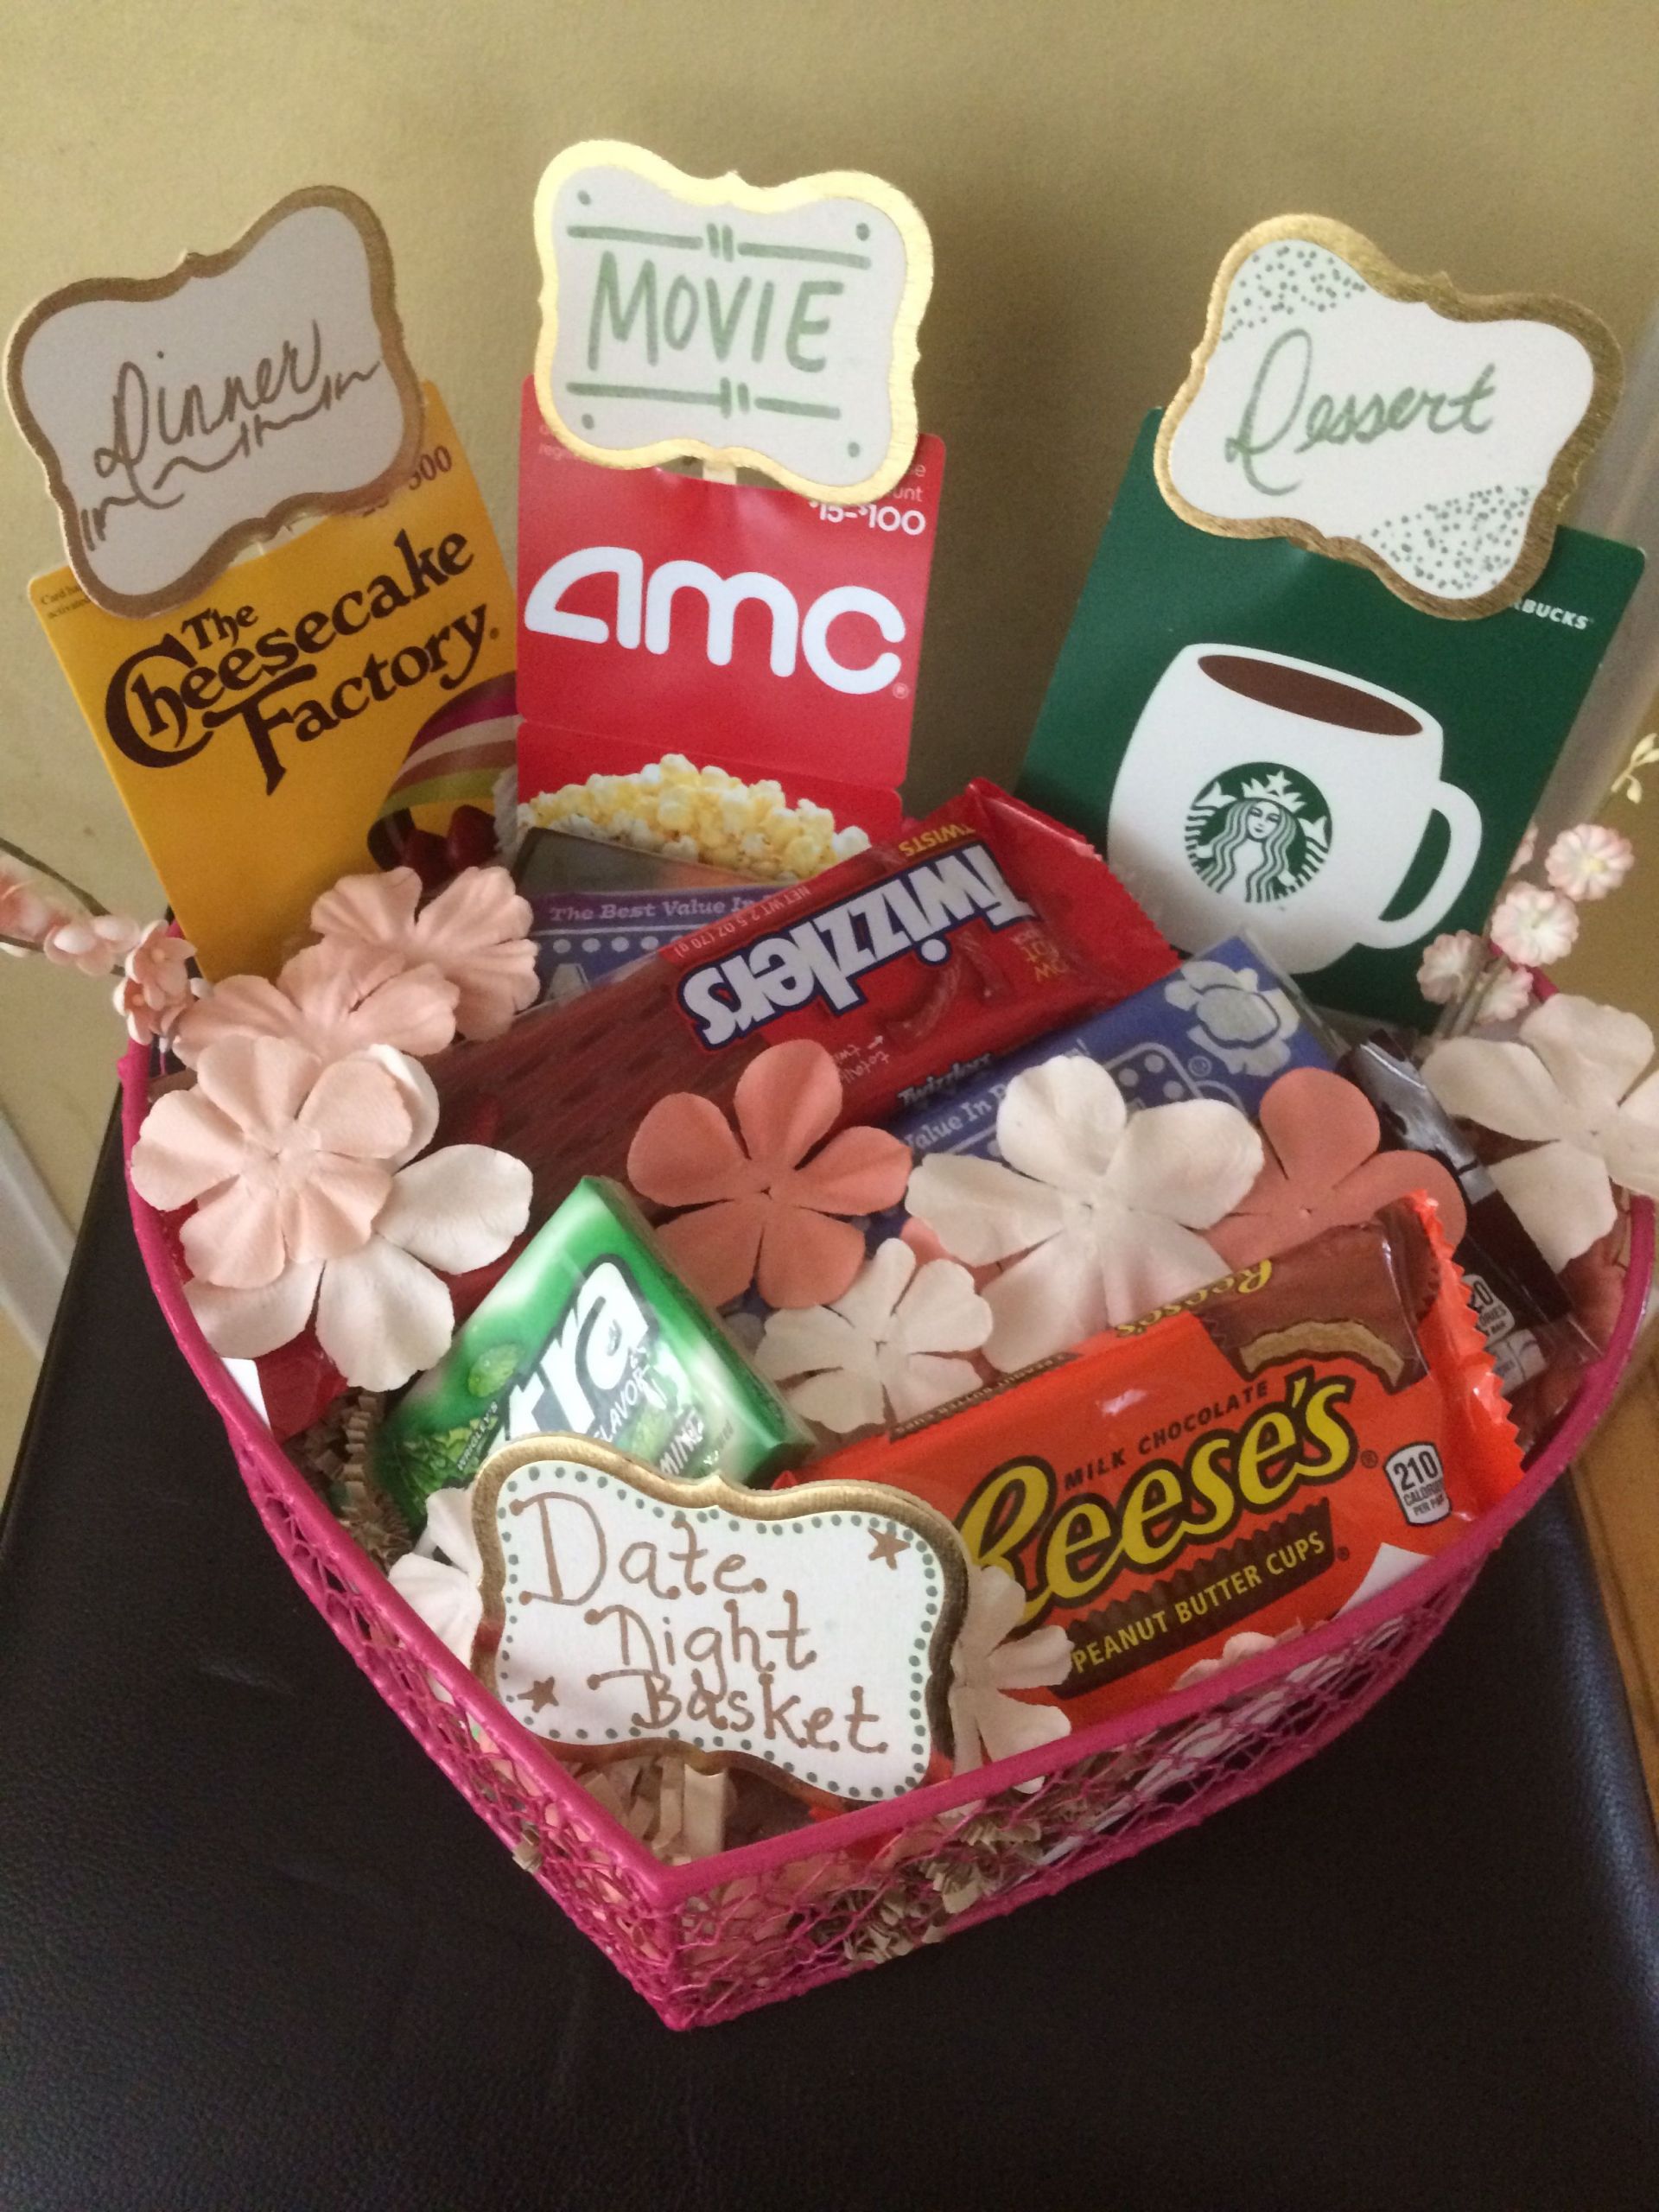 Movie Date Night Gift Basket Ideas
 Date Night Basket For Bride To Be Wedding Shower Gift